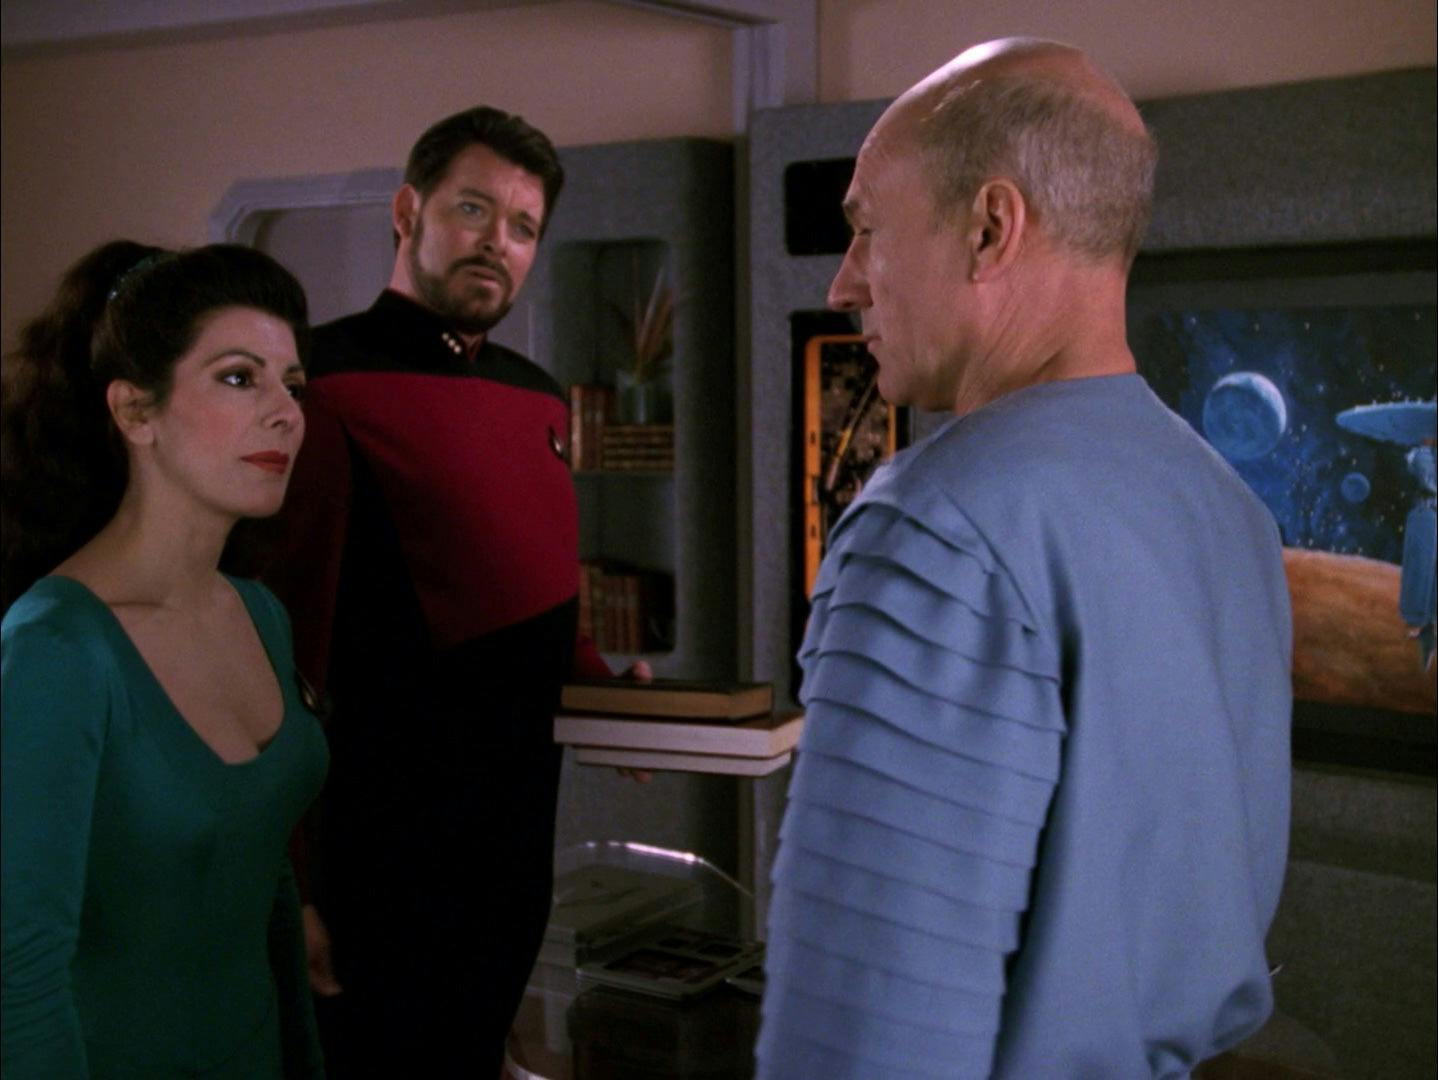 On the Enterprise, Deanna Troi and Will Riker standing next to each other both look at Captain Picard in his relaxed civilian wear in 'Captain's Holiday'